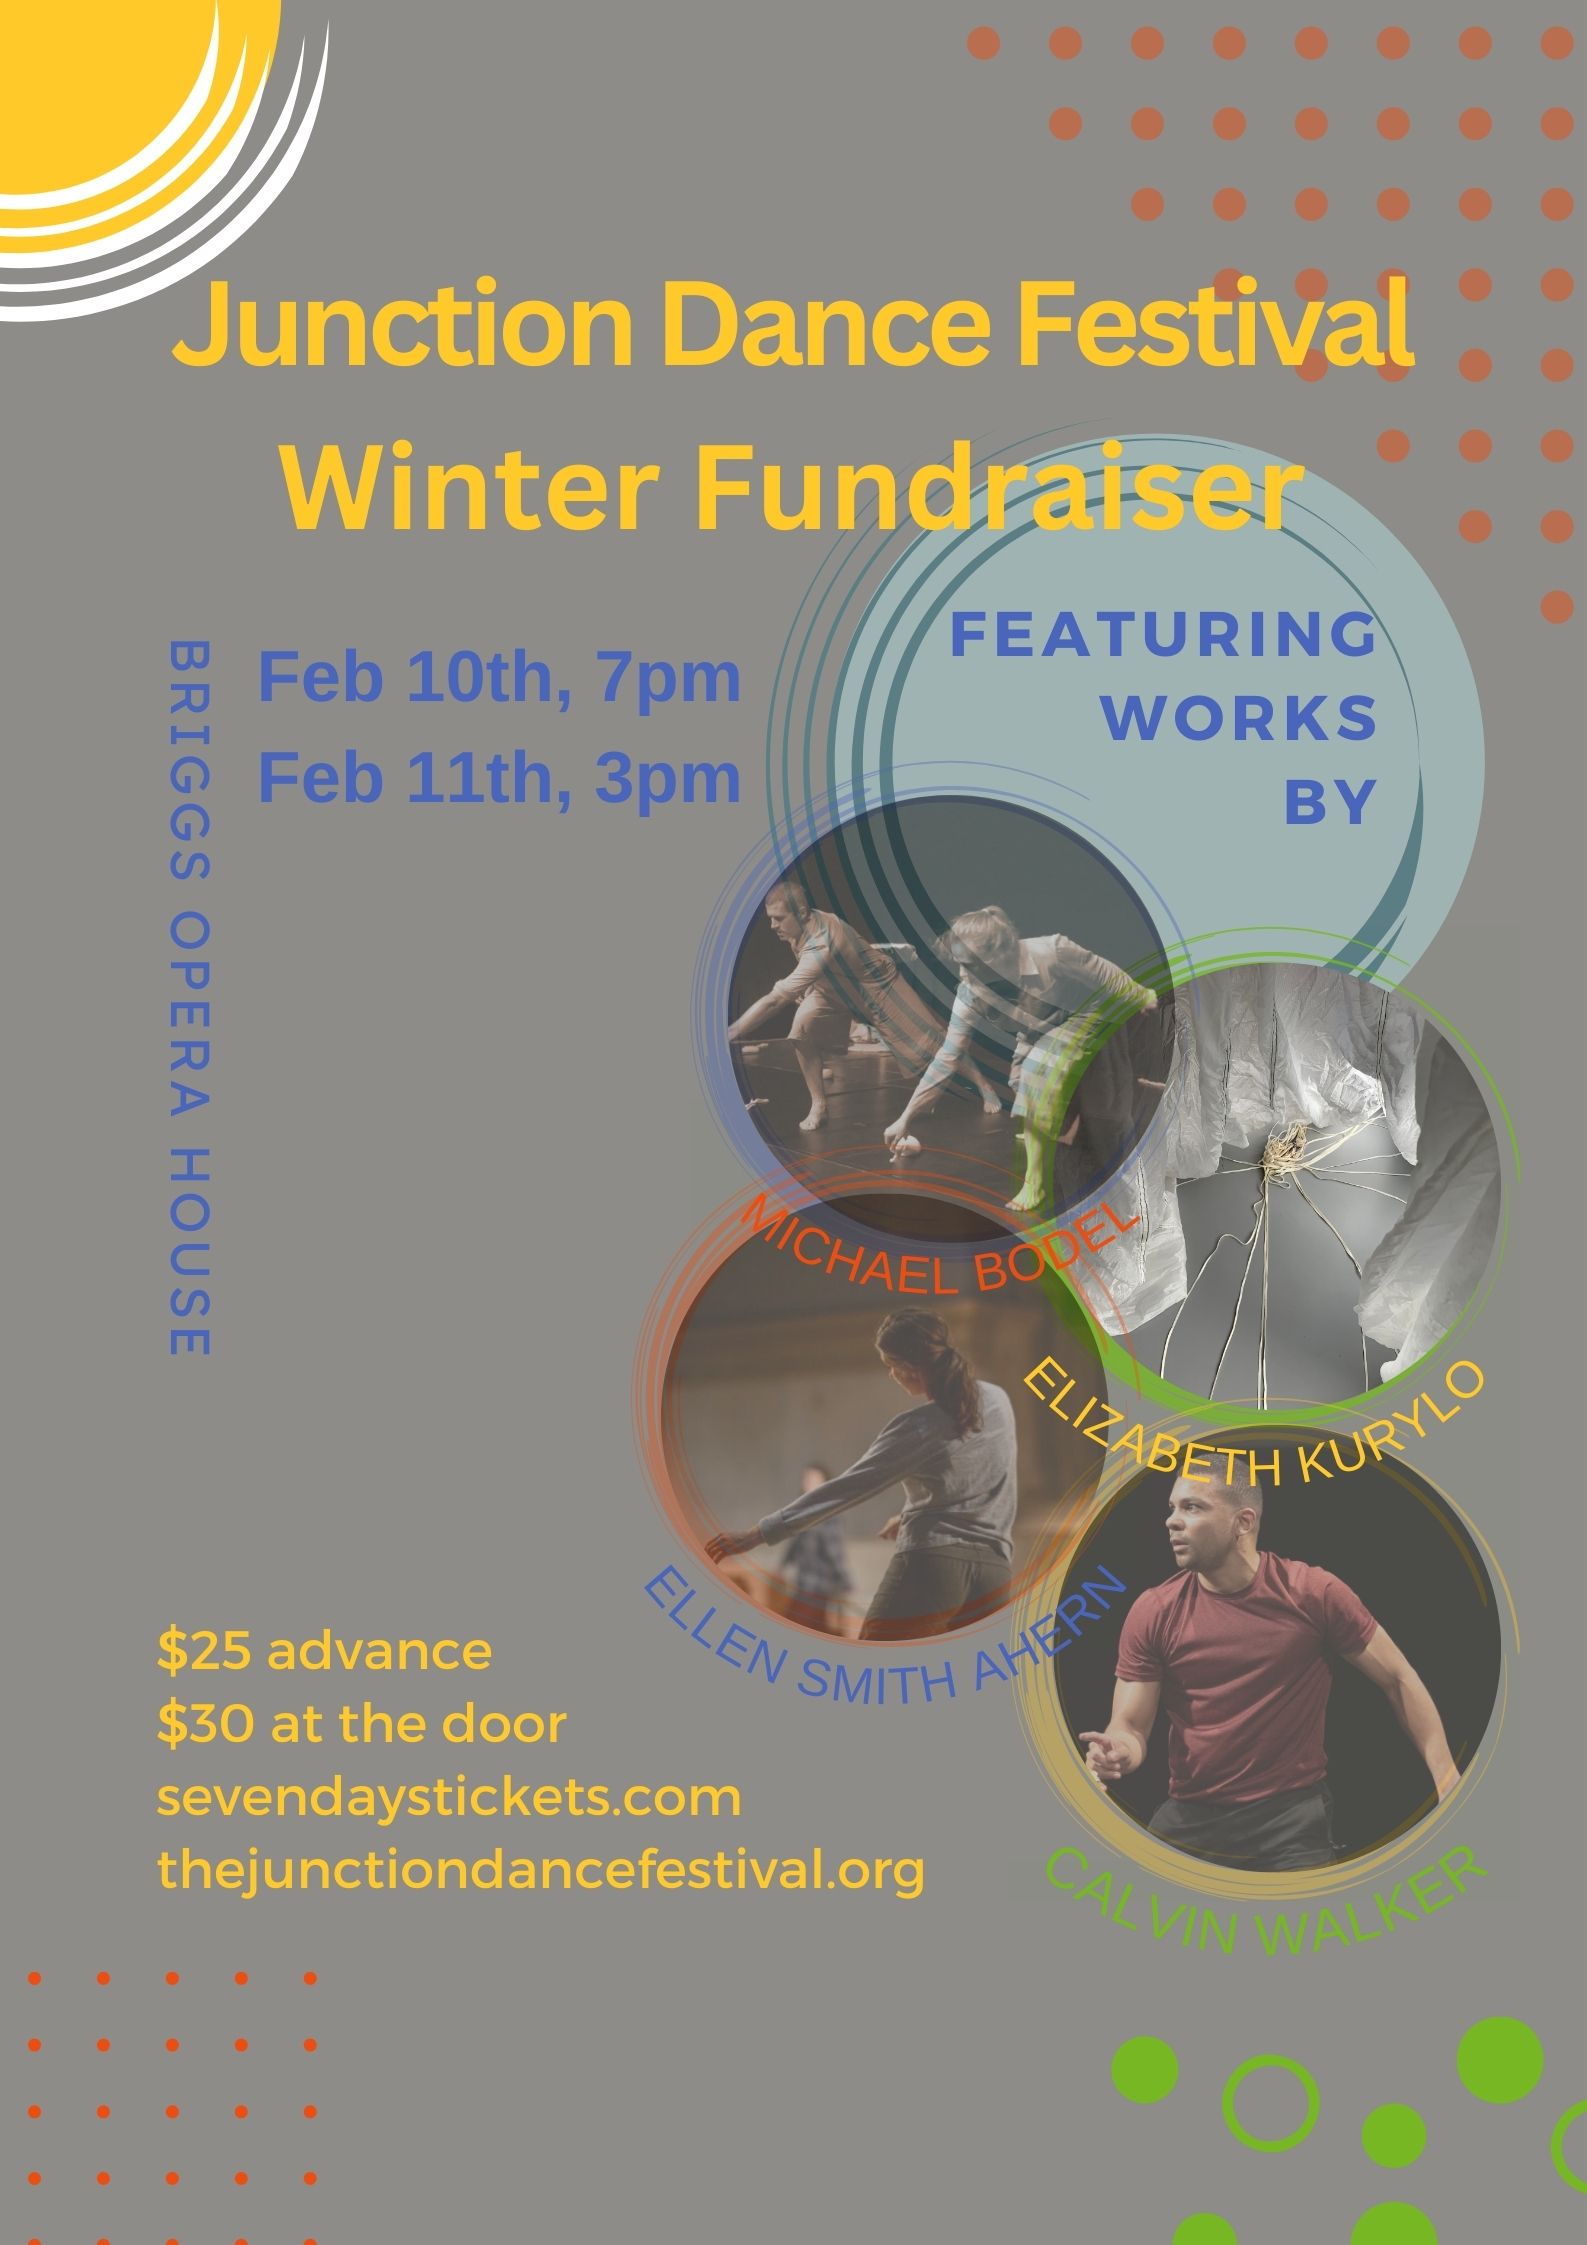 Junction Dance Festival Winter Fundraiser in yellow on grey/brown background